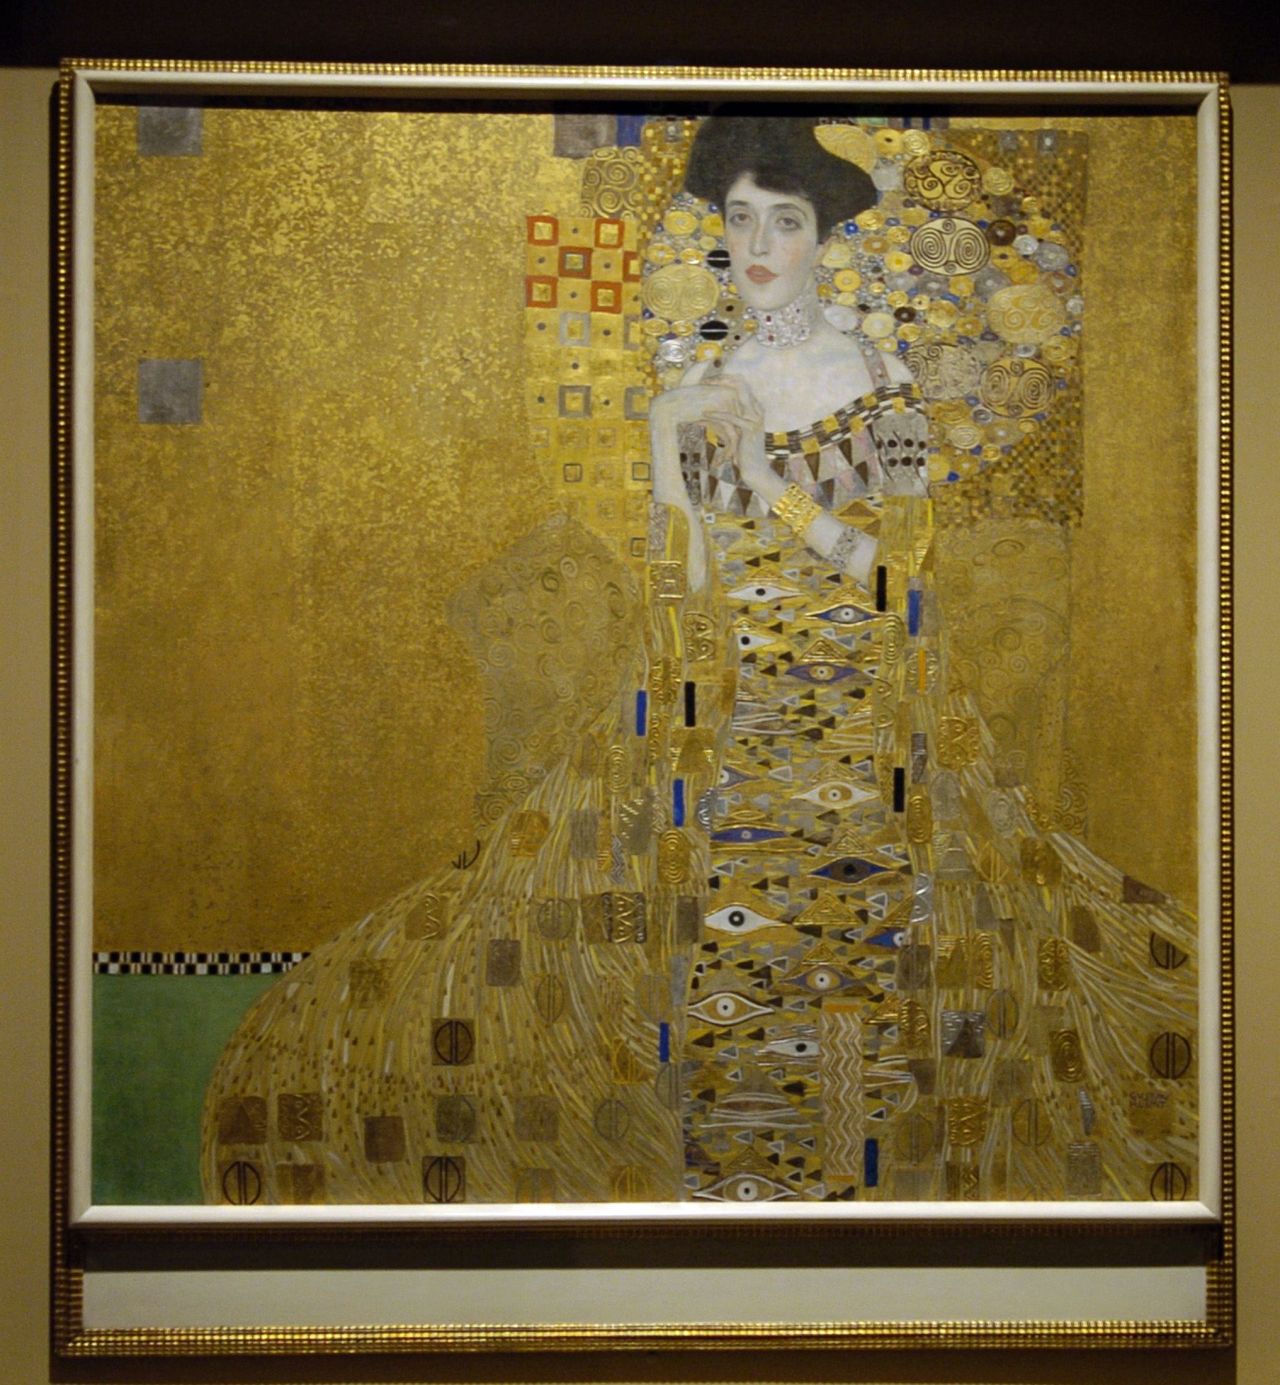 The Nazis plundered countless precious artworks during World War II, including "Adele Bloch-Bauer I," by Austrian artist Gustav Klimt, which was confiscated from the owner as he fled Austria.